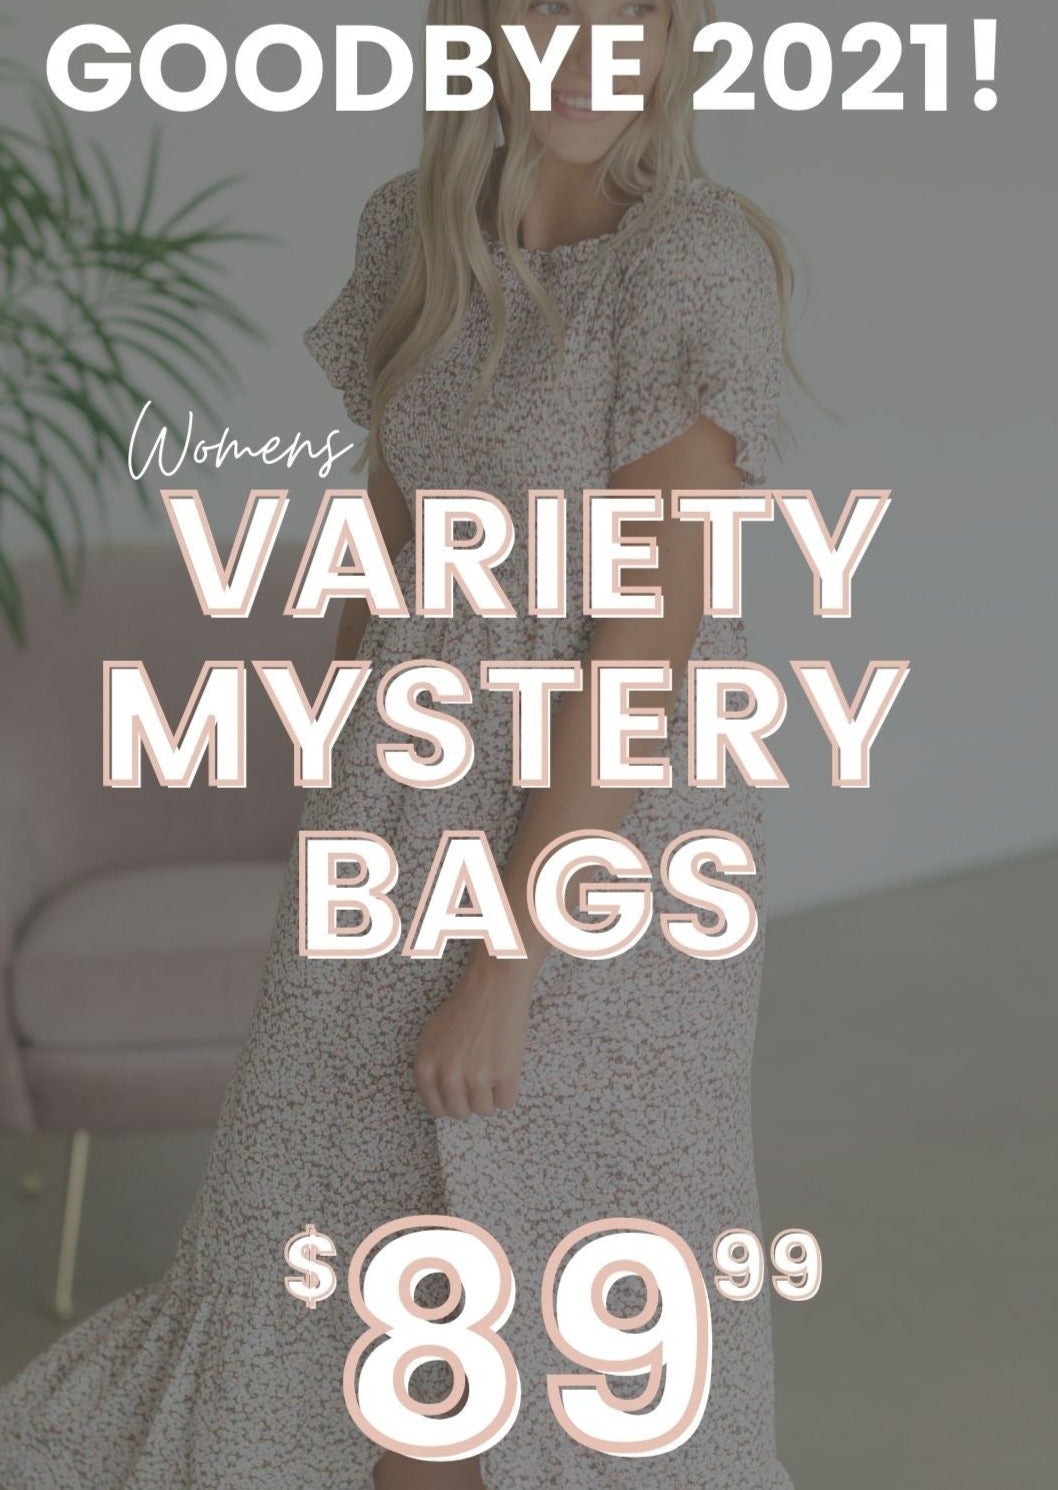 GOODBYE 2021 VARIETY BAGS! $89.99 (Up to $240 Value) Inherit Co.